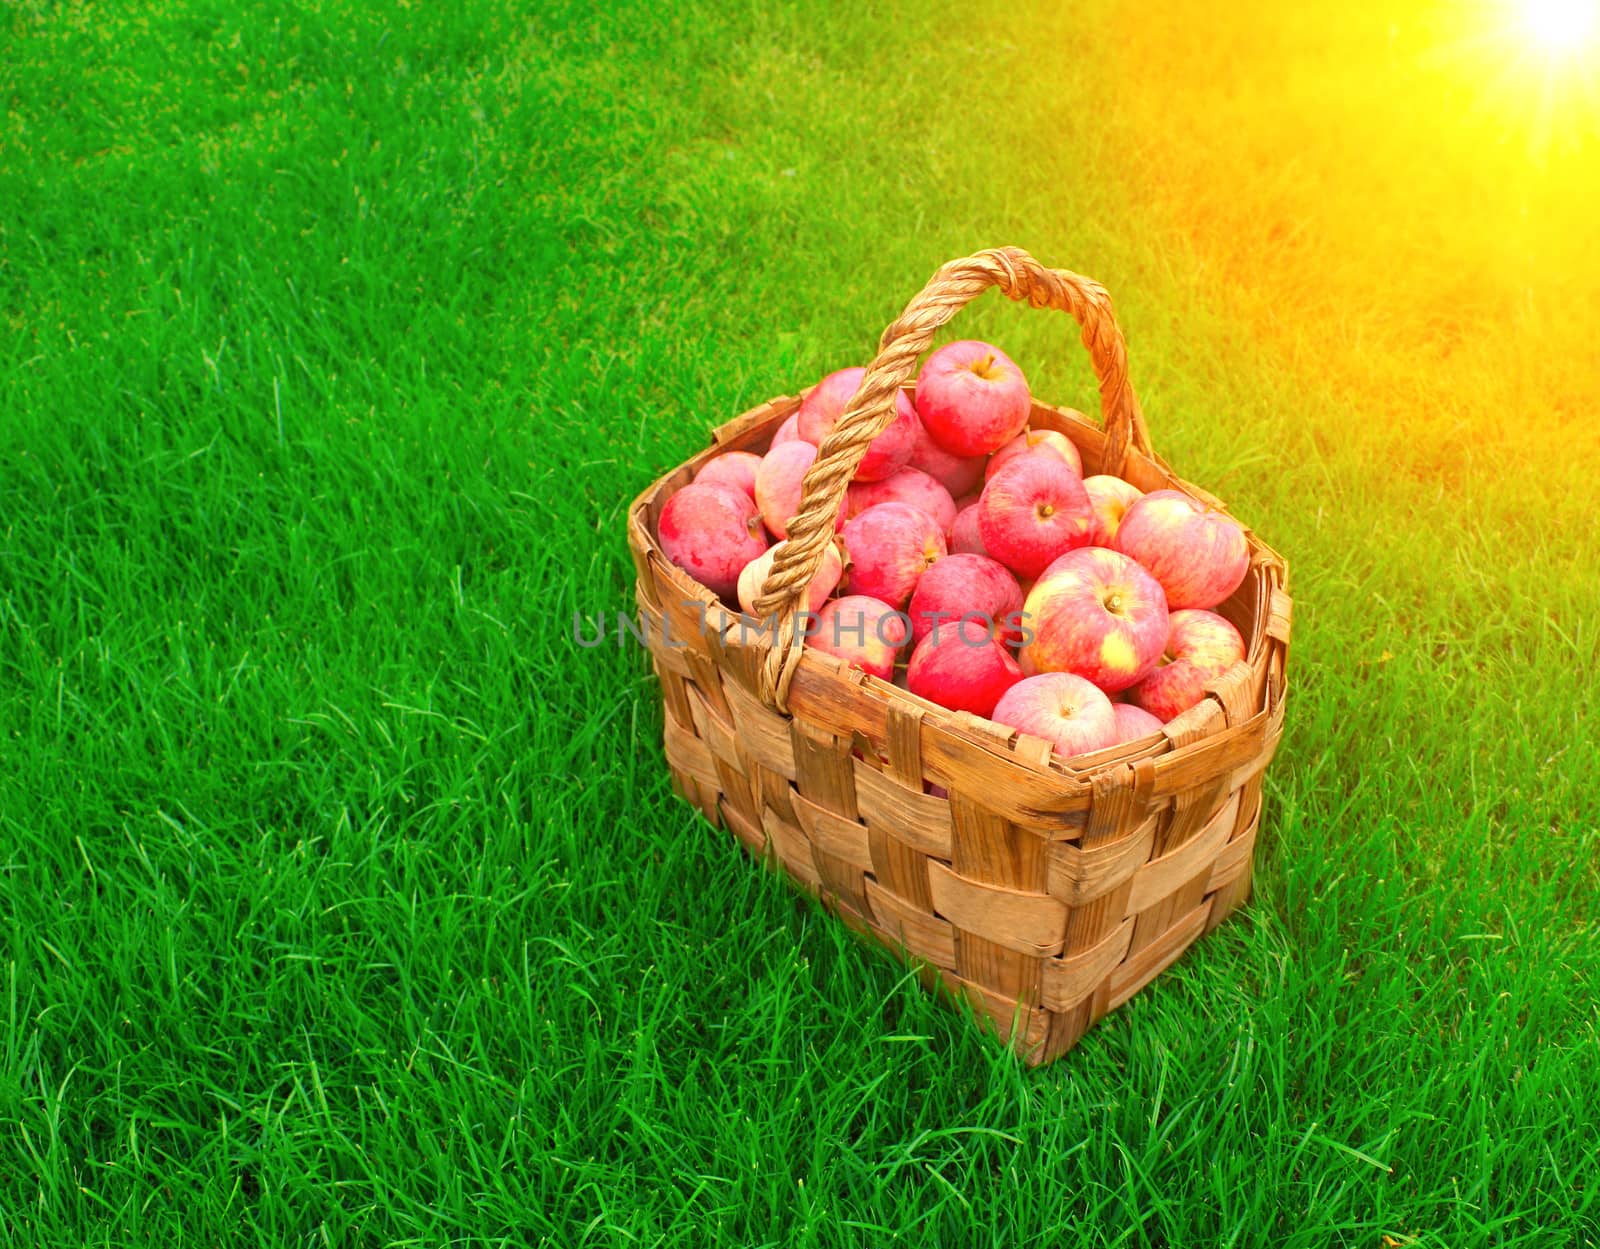 Basket with apples on a green grass